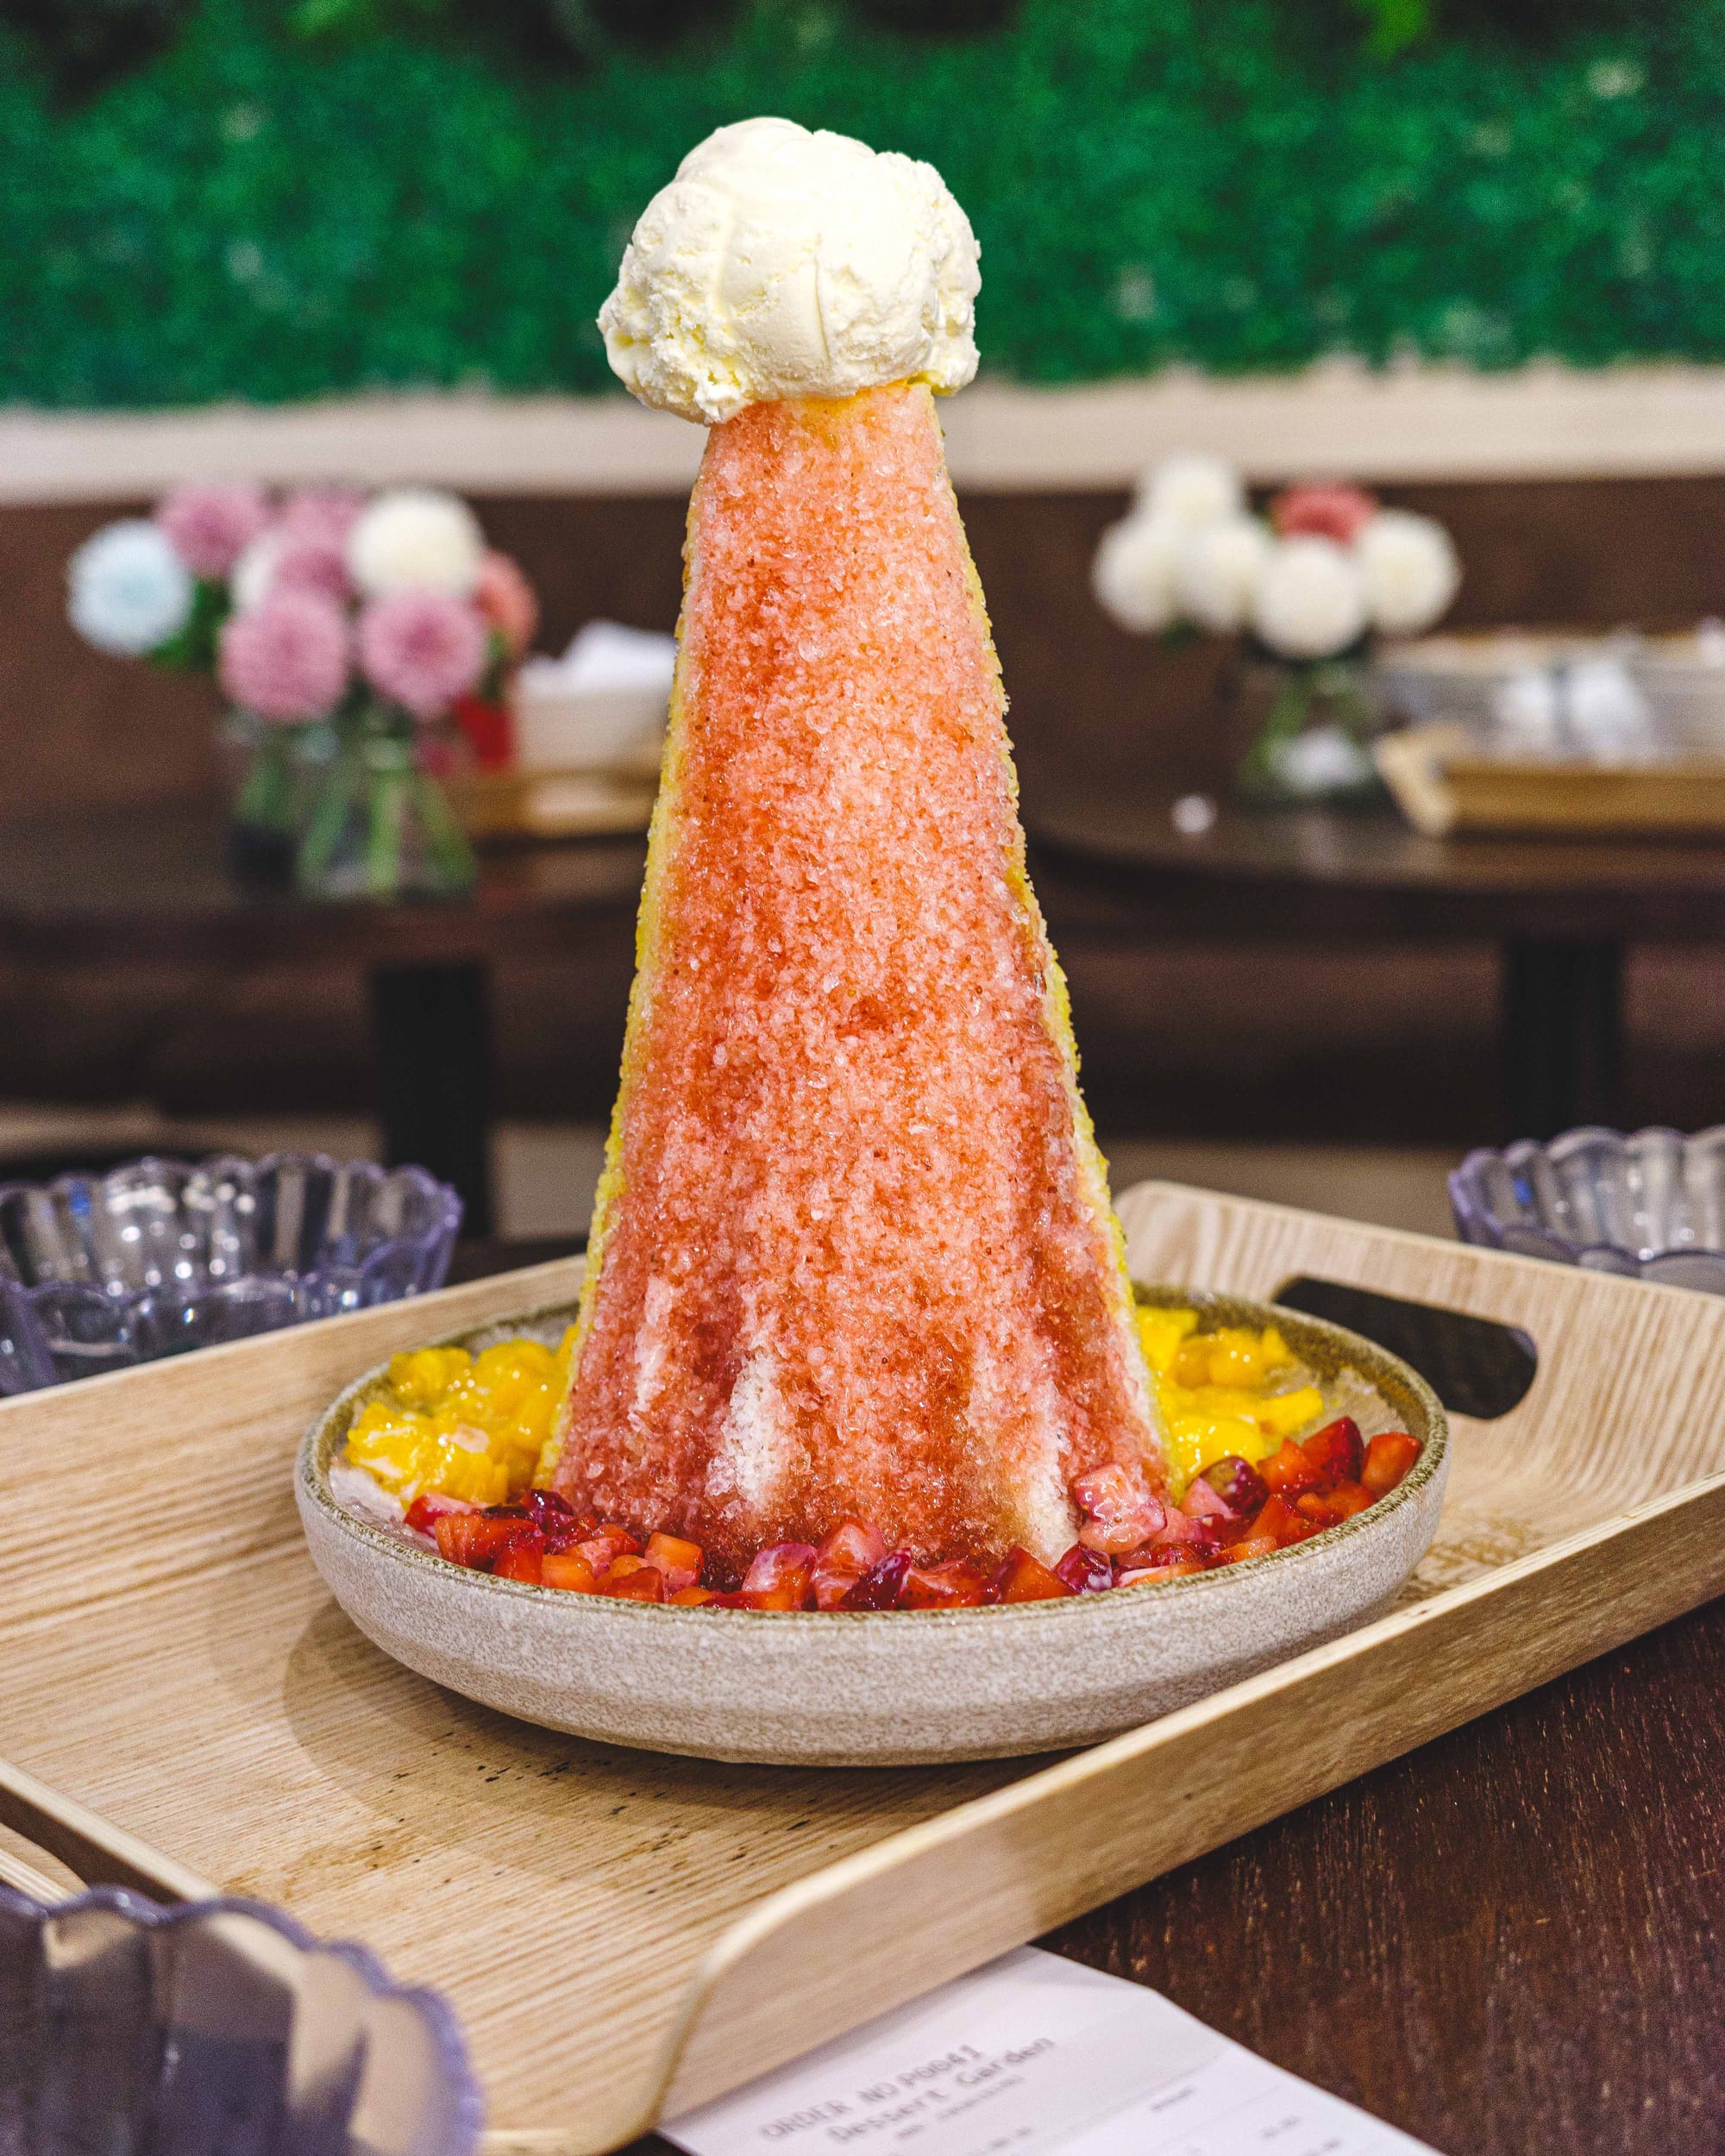 Cone shaped coloured tower made from ice with a scoop of ice-cream on top